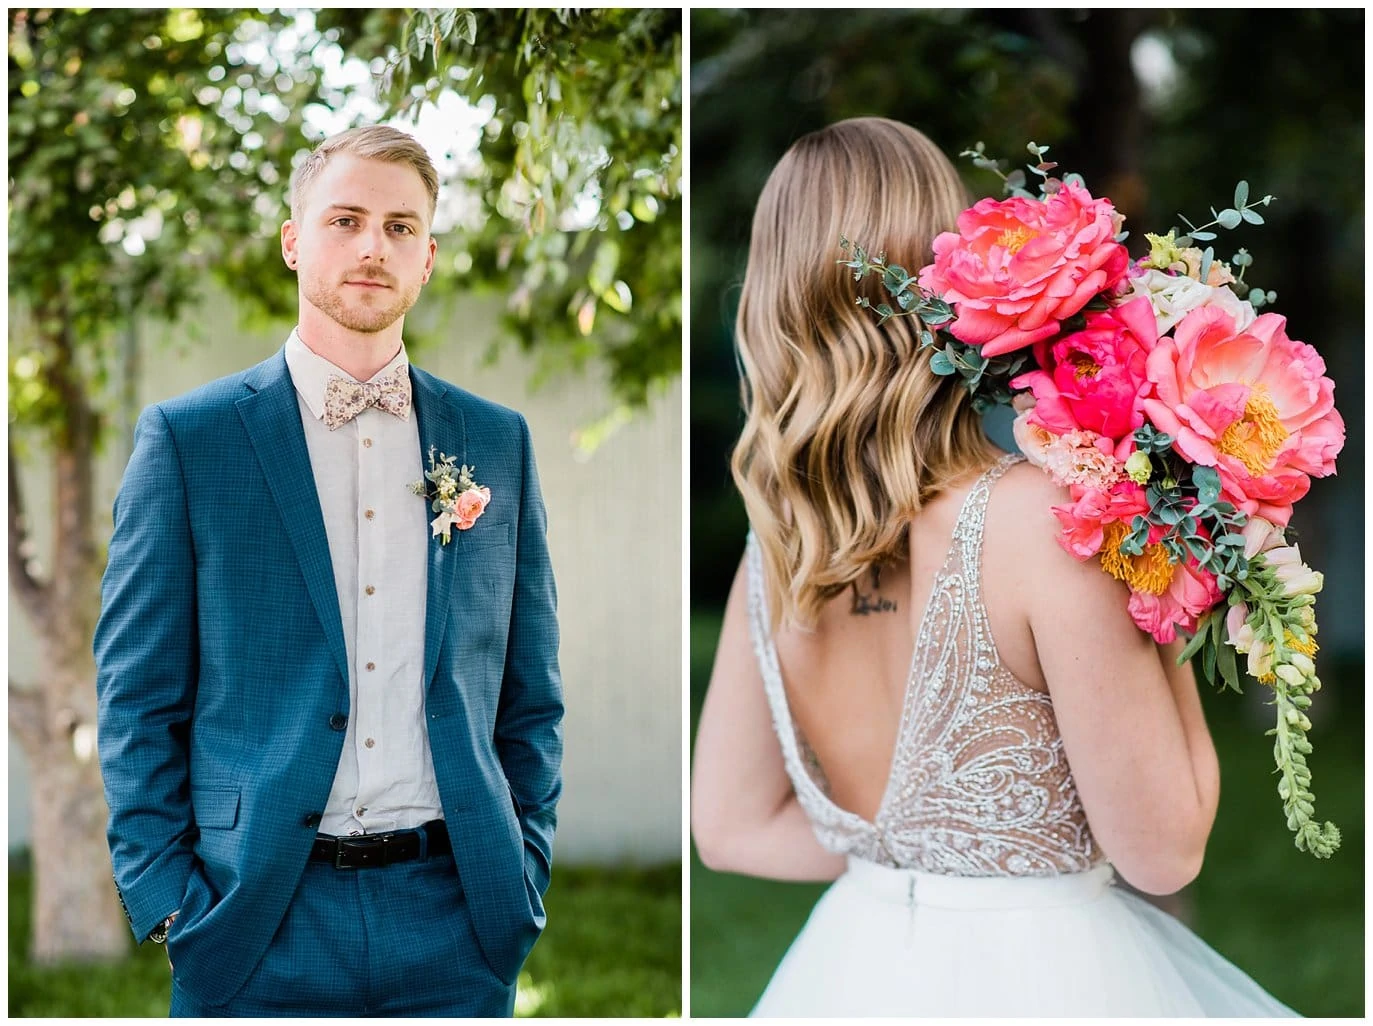 vibrant pink bridal bouquet and beaded wedding dress at summer blanc wedding by Denver wedding photographer Jennie Crate photographer